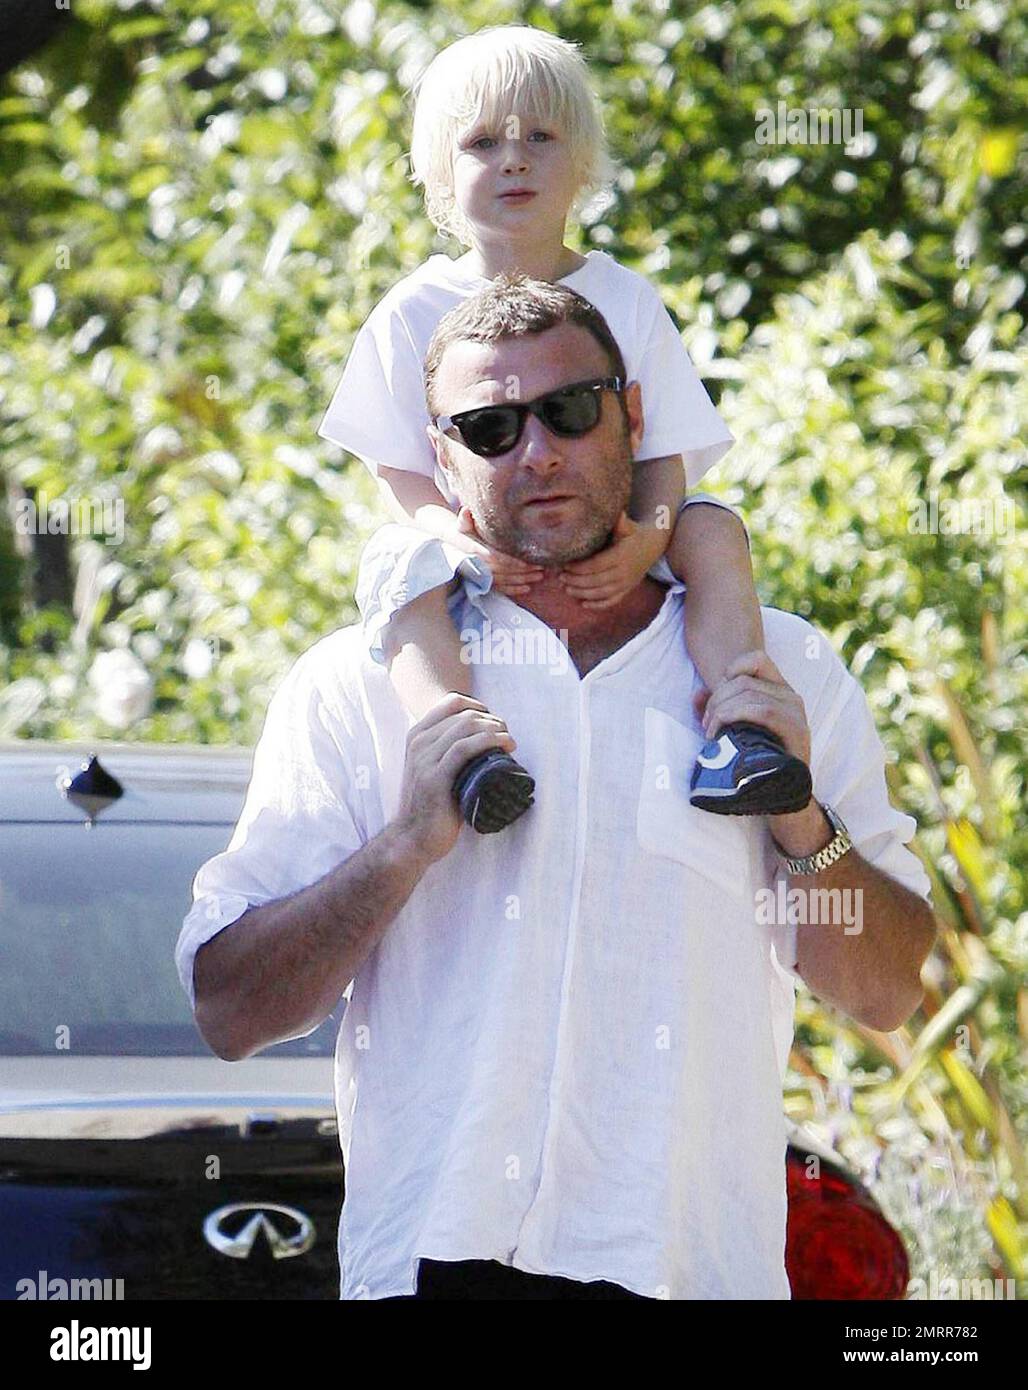 'Salt' actor Liev Schreiber gives son Alexander Pete a piggyback ride while on a walk with friends around the suburbs. Schreiber has recently been reported as saying, 'I think weÕre both ['Salt' co-star Angelina Jolie] in that place with our kids where theyÕre really amazing, right around three-years-old, when all the language starts to come out of them. ItÕs a very exciting period in someoneÕs life, both the childÕs and the parents, and it was fun to bond over that.' Schreiber has two sons with wife Naomi Watts, Alexander and Samuel Kai. Los Angeles, CA. 07/24/10.   . Stock Photo